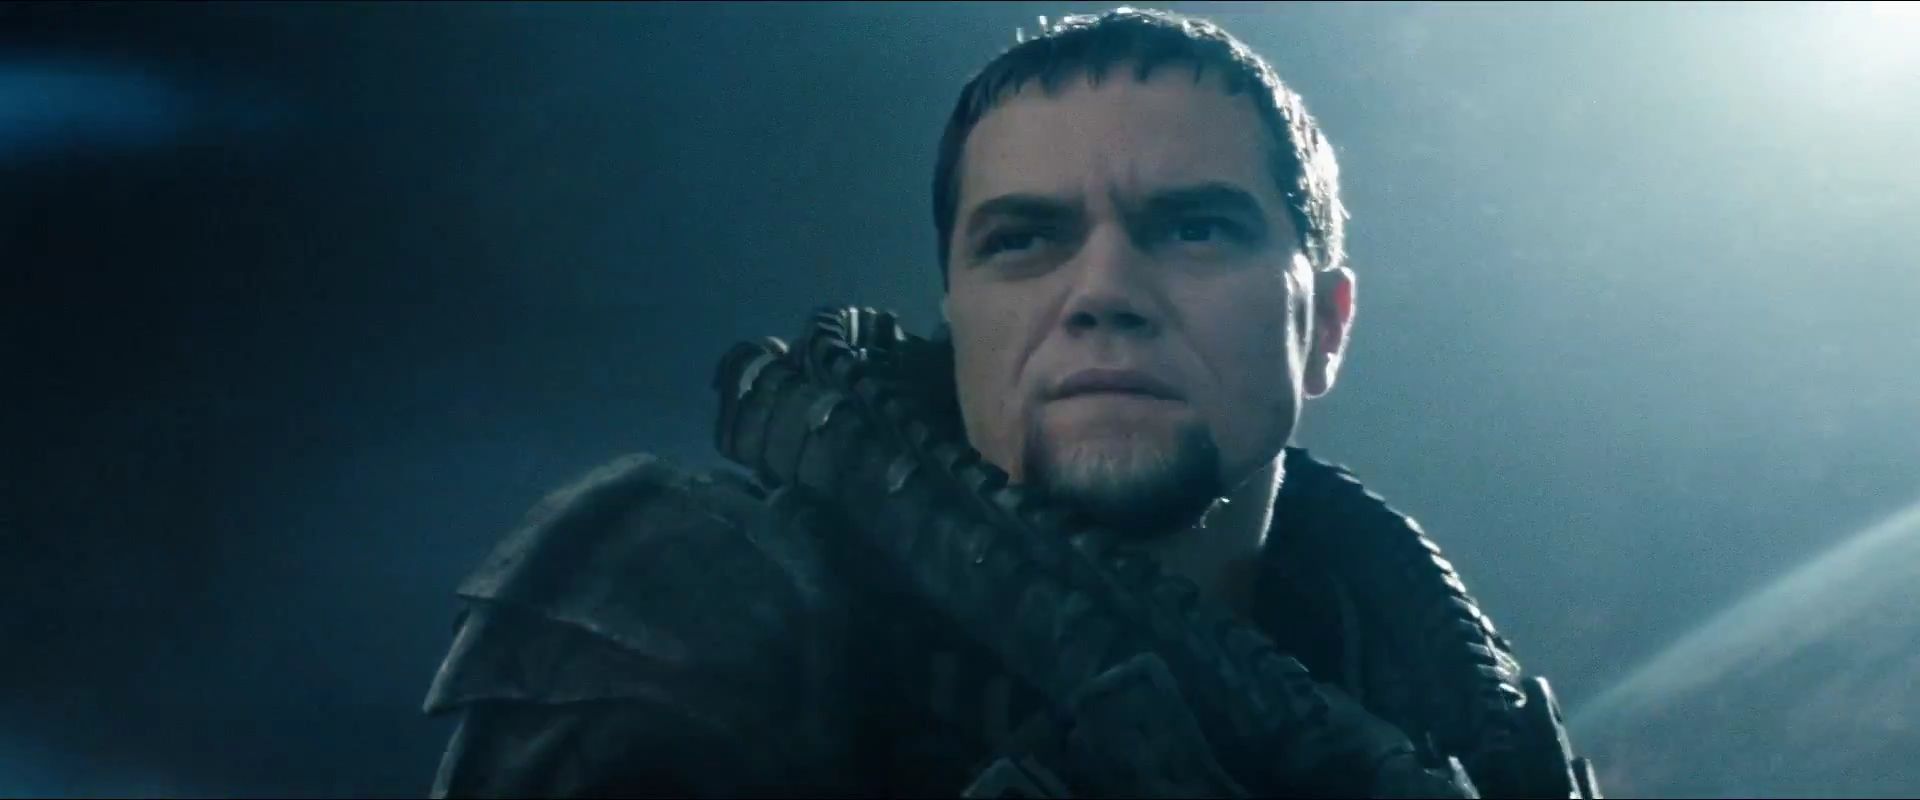 Image result for general zod man of steel